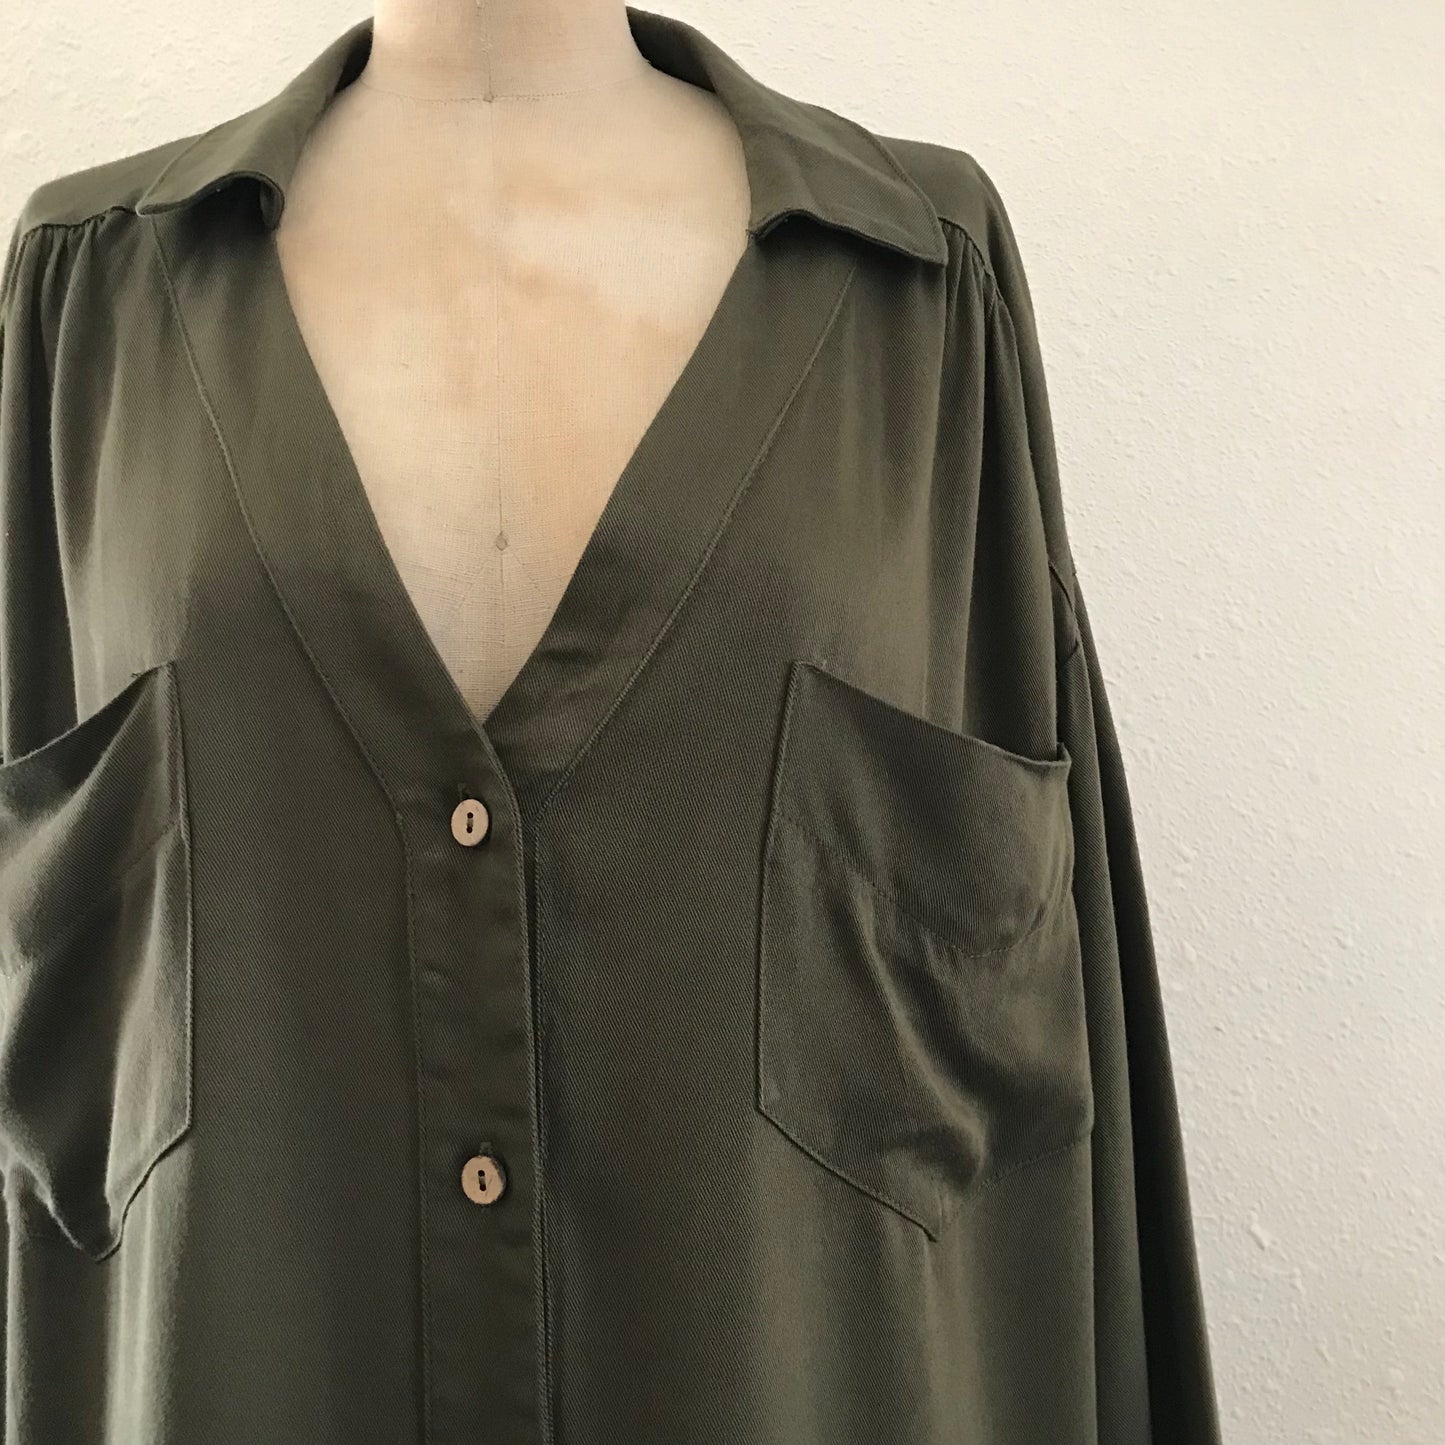 Mittoshop Olive Green Long Sleeve Lagenlook Tunic Top Shirt